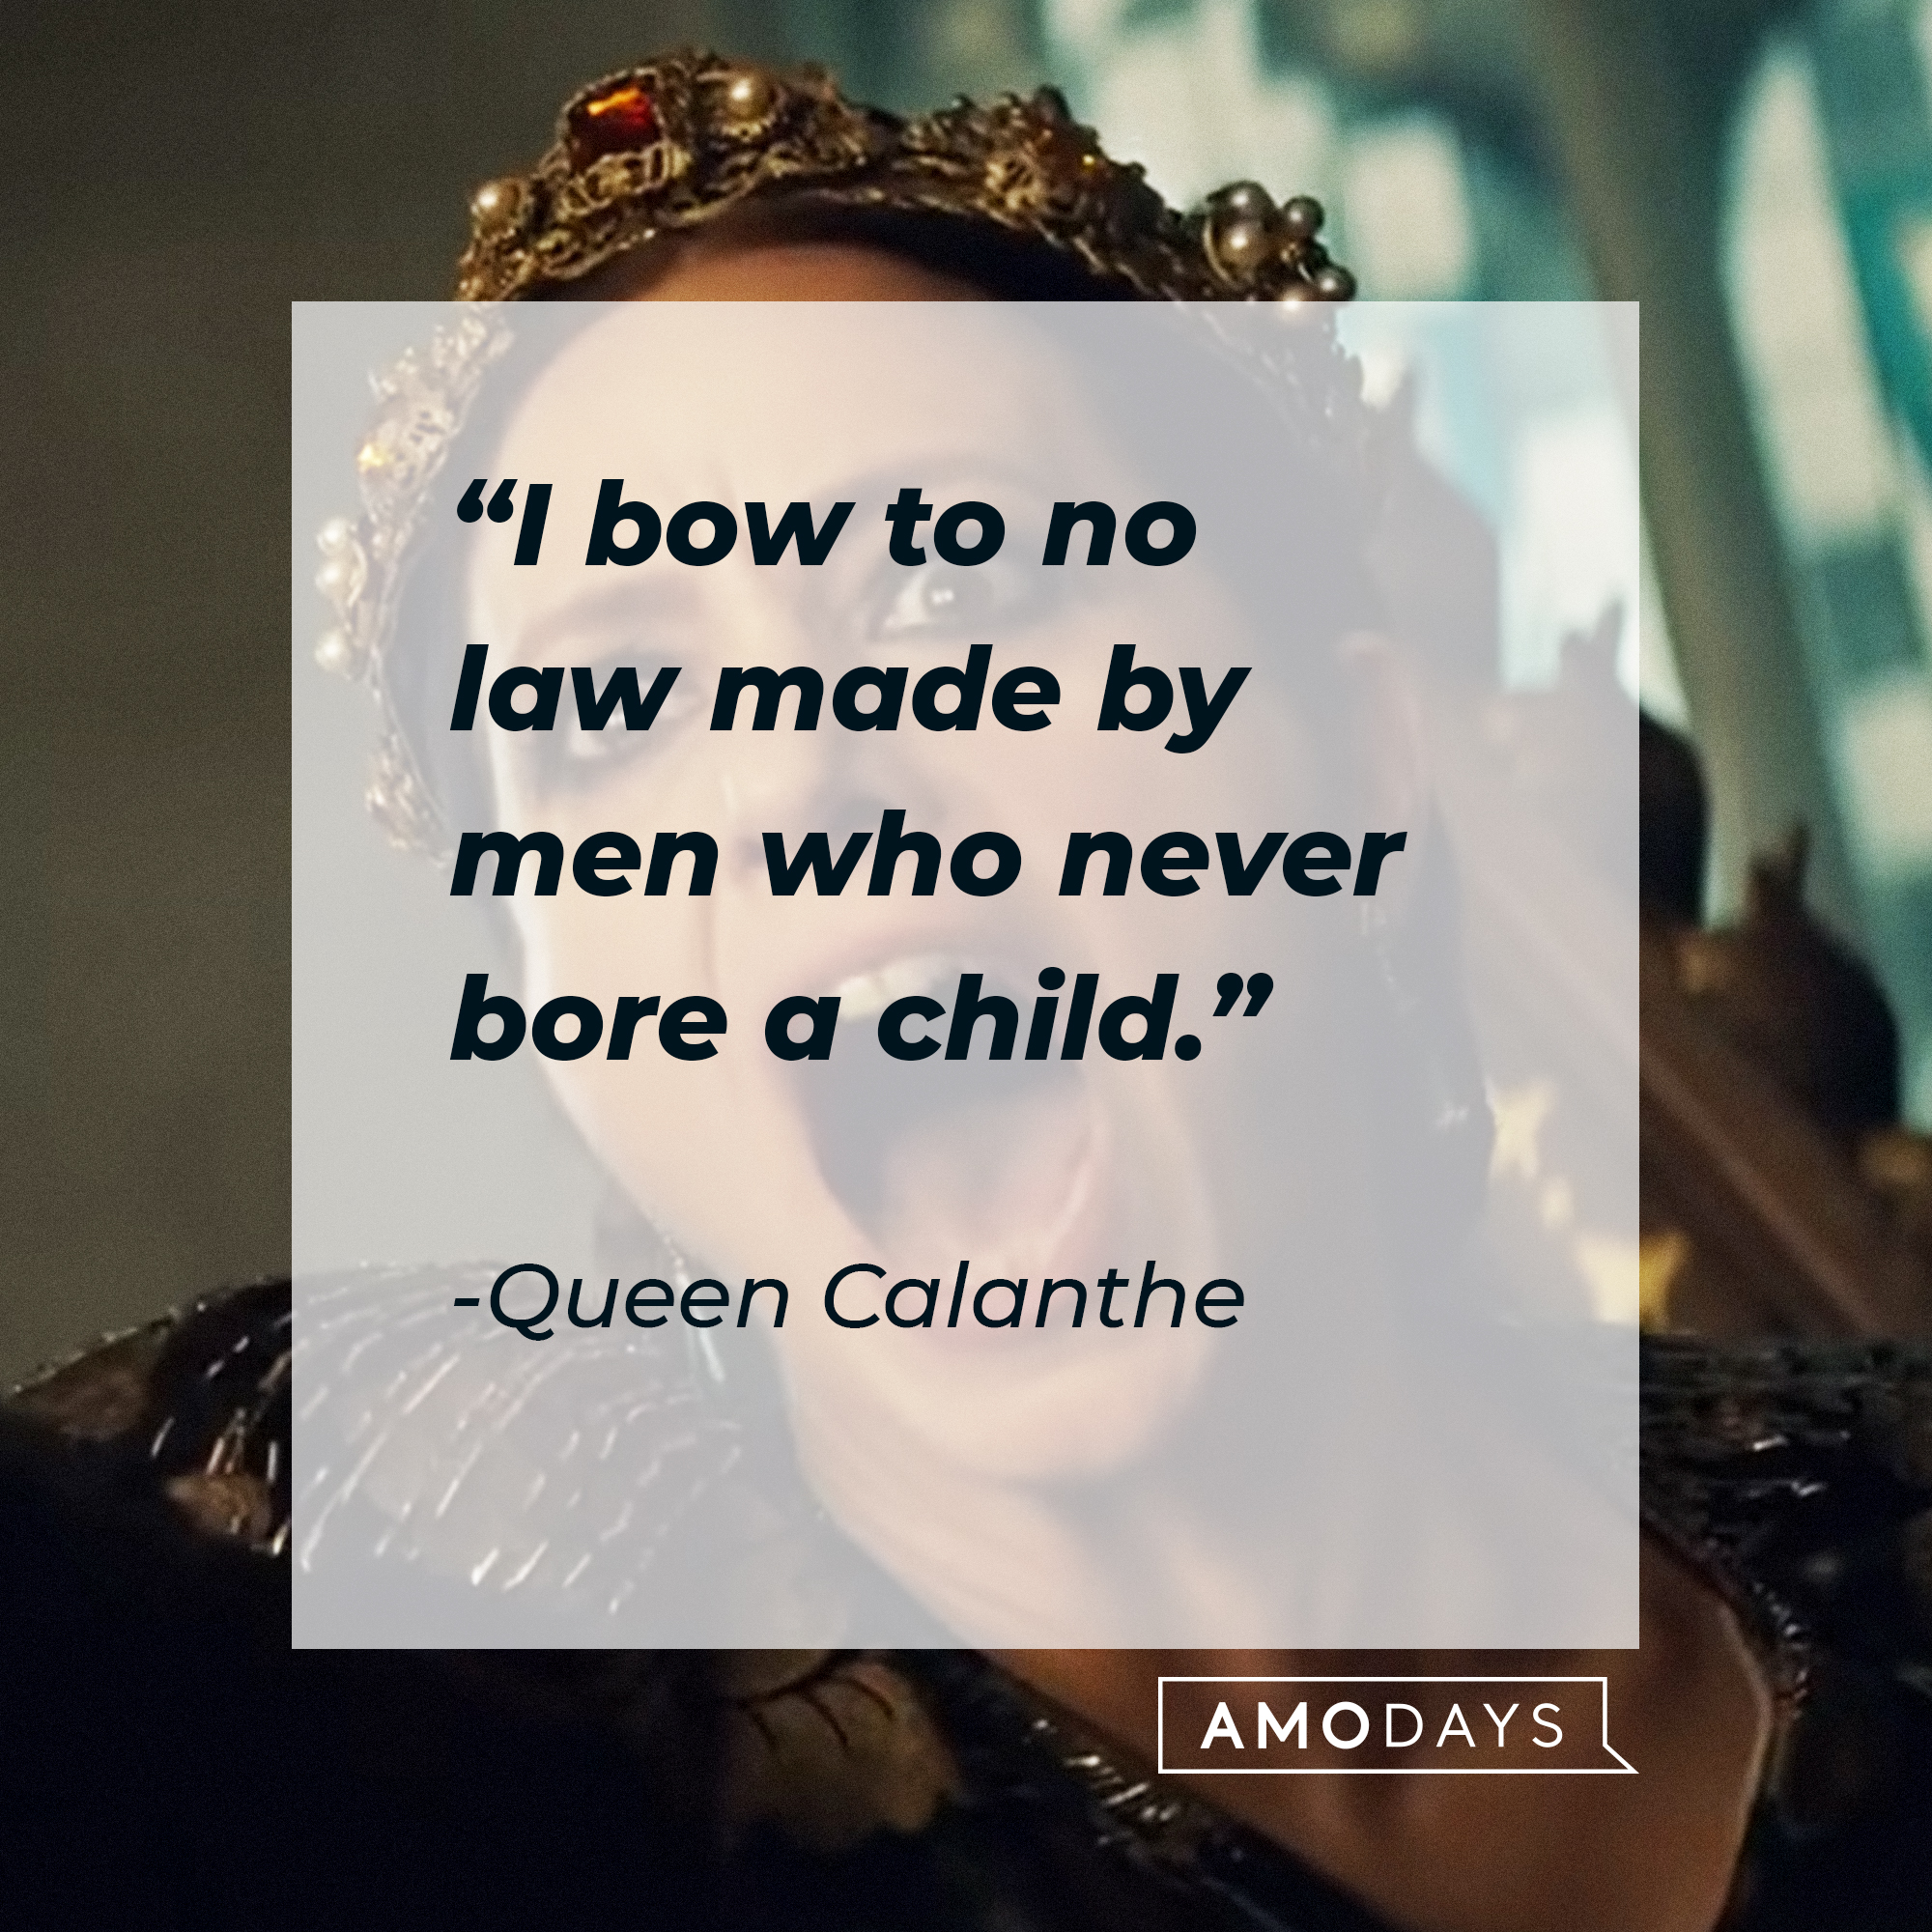 Queen Calanthe's quote: "I bow to no law made by men who never bore a child." | Source: YouTube/Netflix